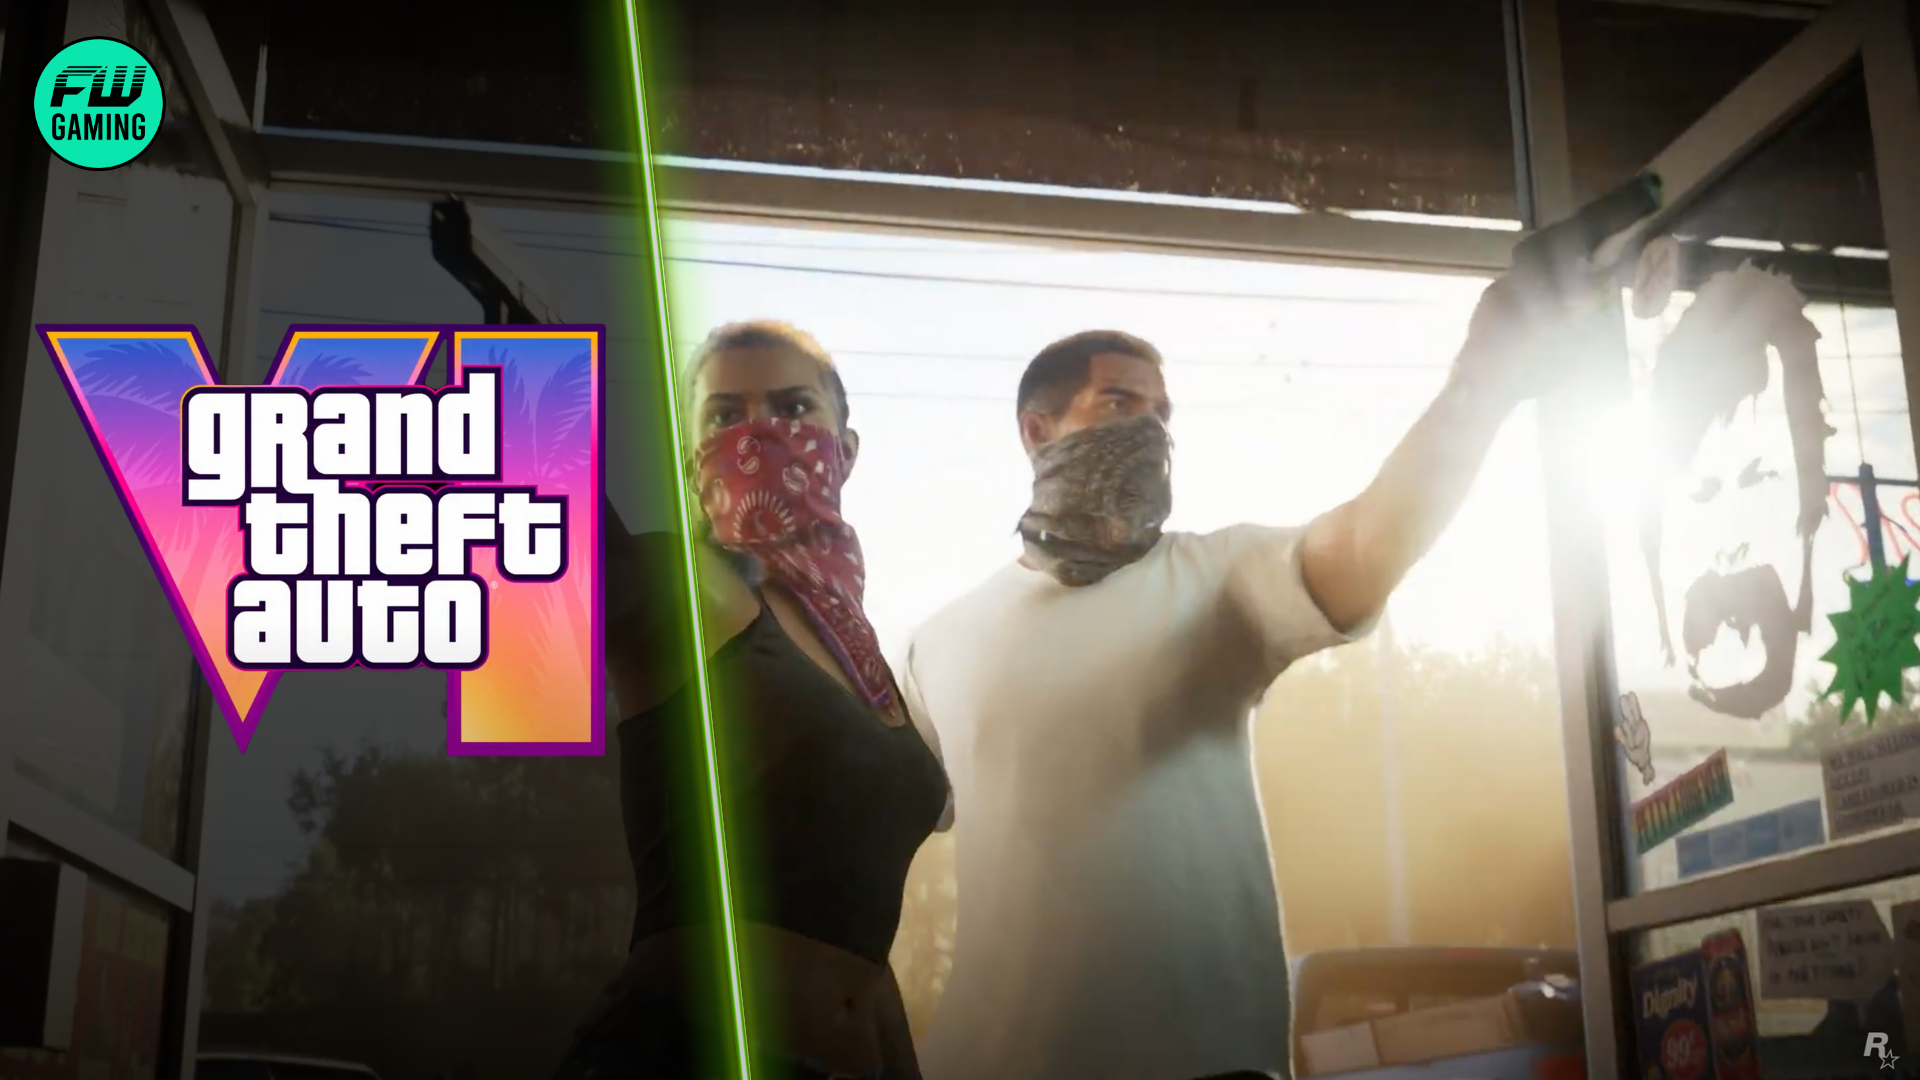 Upcoming GTA 6 Release Predicting the Price and What Gamers Can Expect in 2025